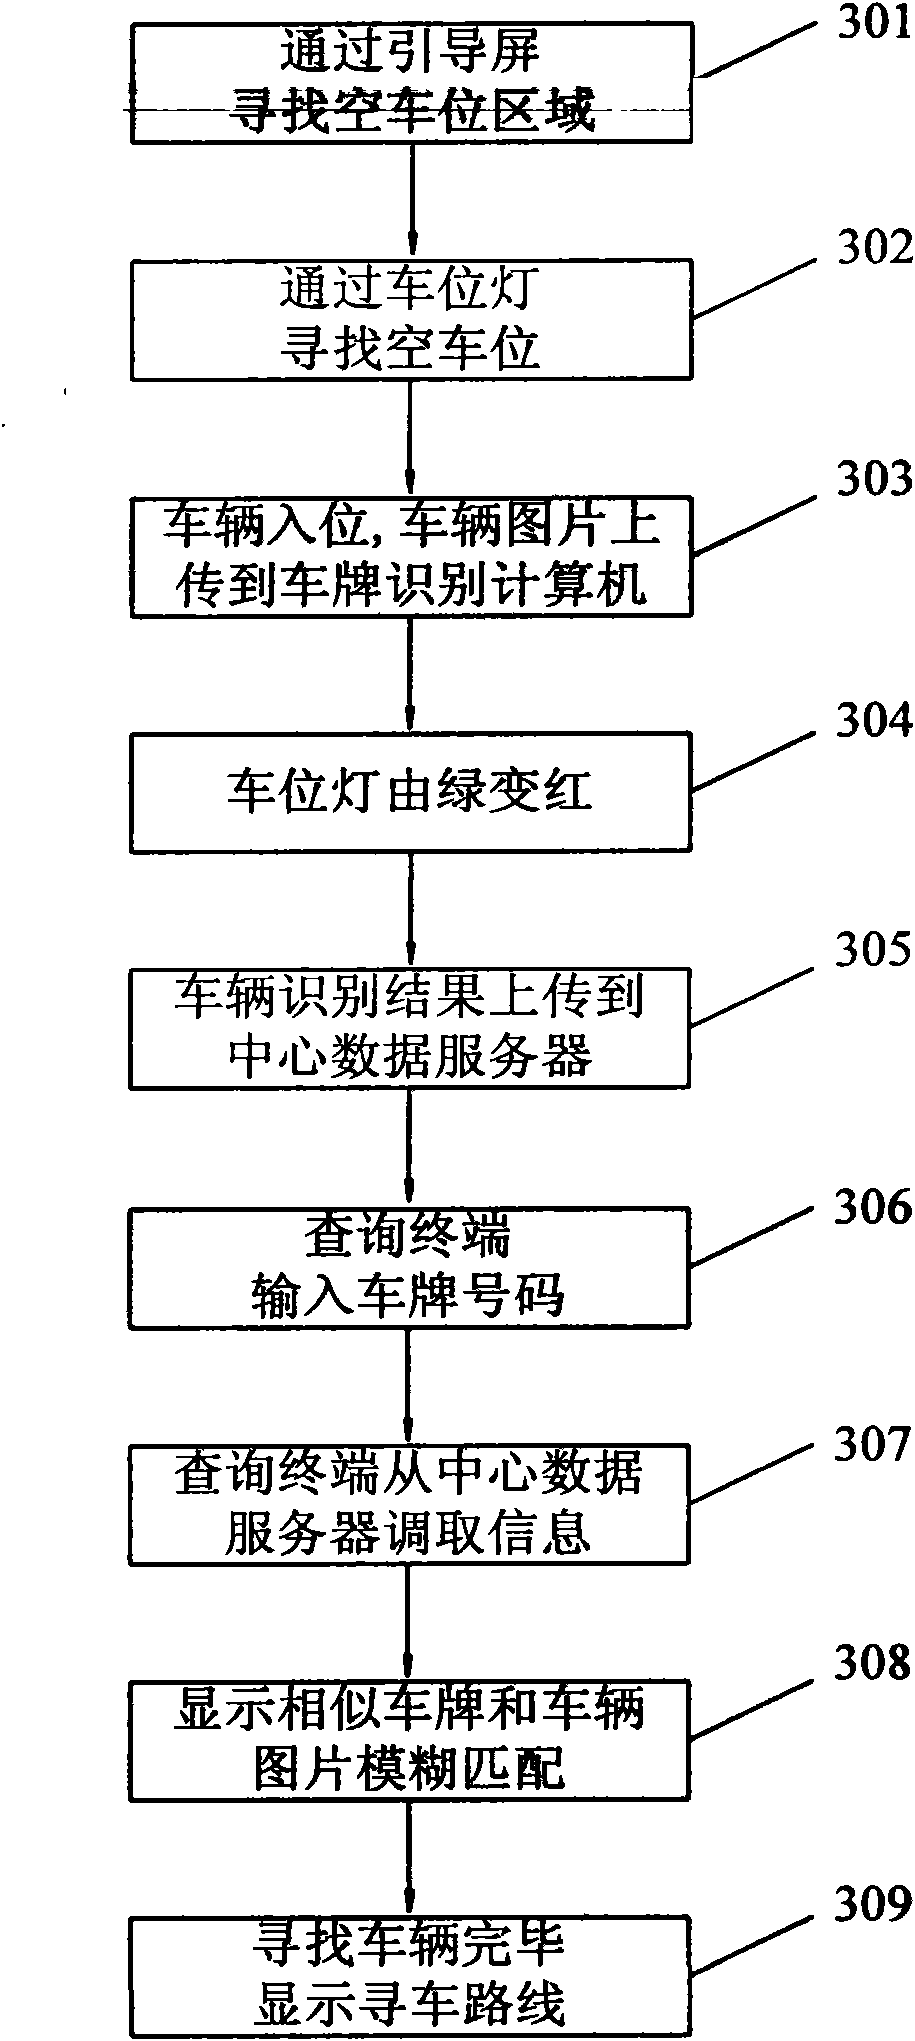 Parking space guiding and reverse vehicle searching system and method